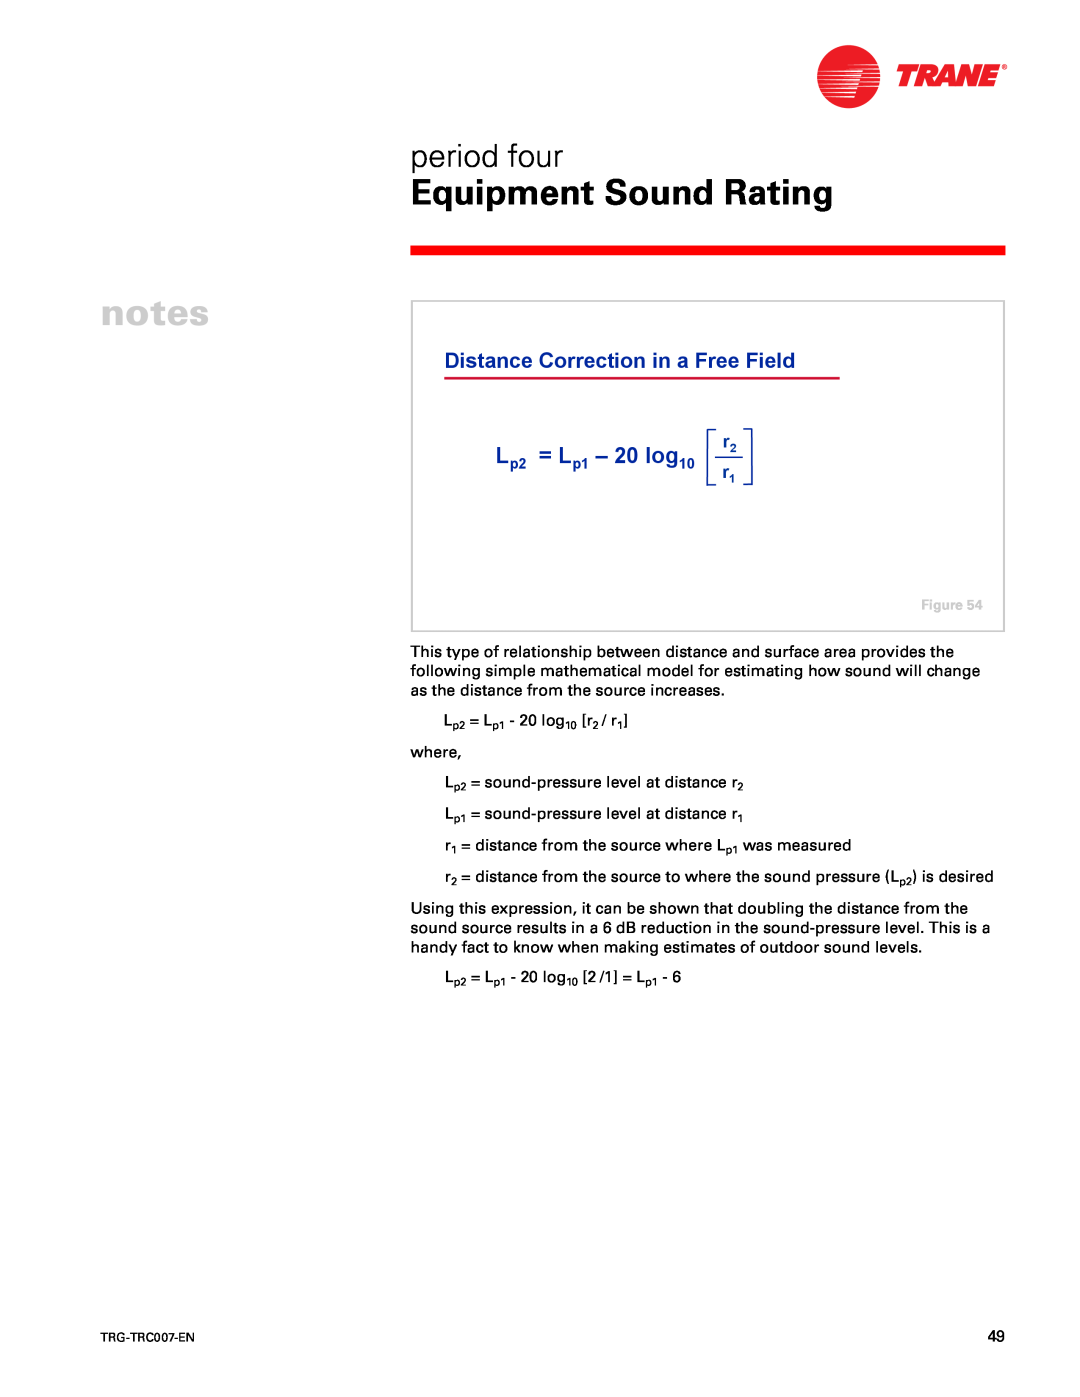 Trane TRG-TRC007-EN manual = Lp1, 20 log10, Distance Correction in a Free Field, Equipment Sound Rating, period four 